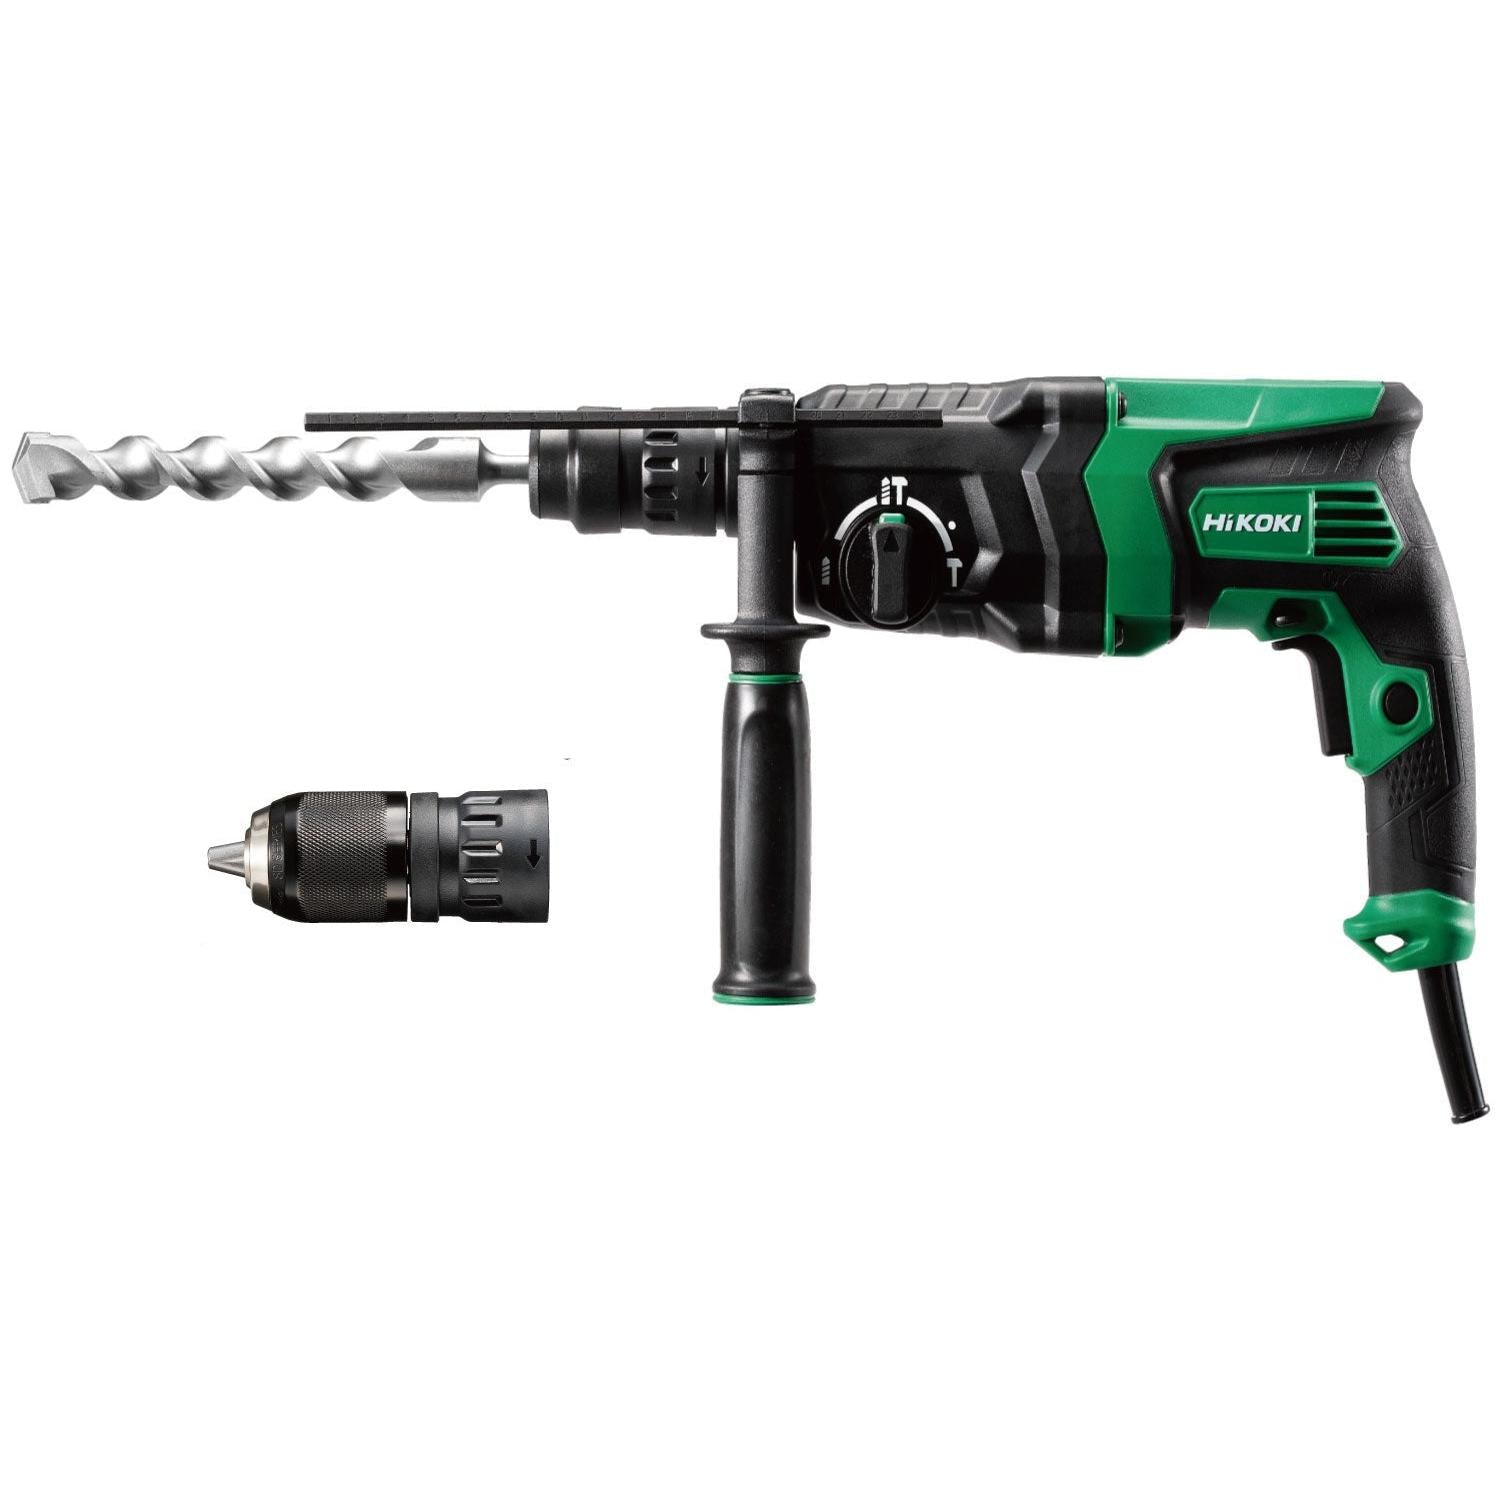 Hikoki Drill Rotary  830W 26Mm Sds+ 3Mod HTC-DH26PMC-WS Power Tool Services